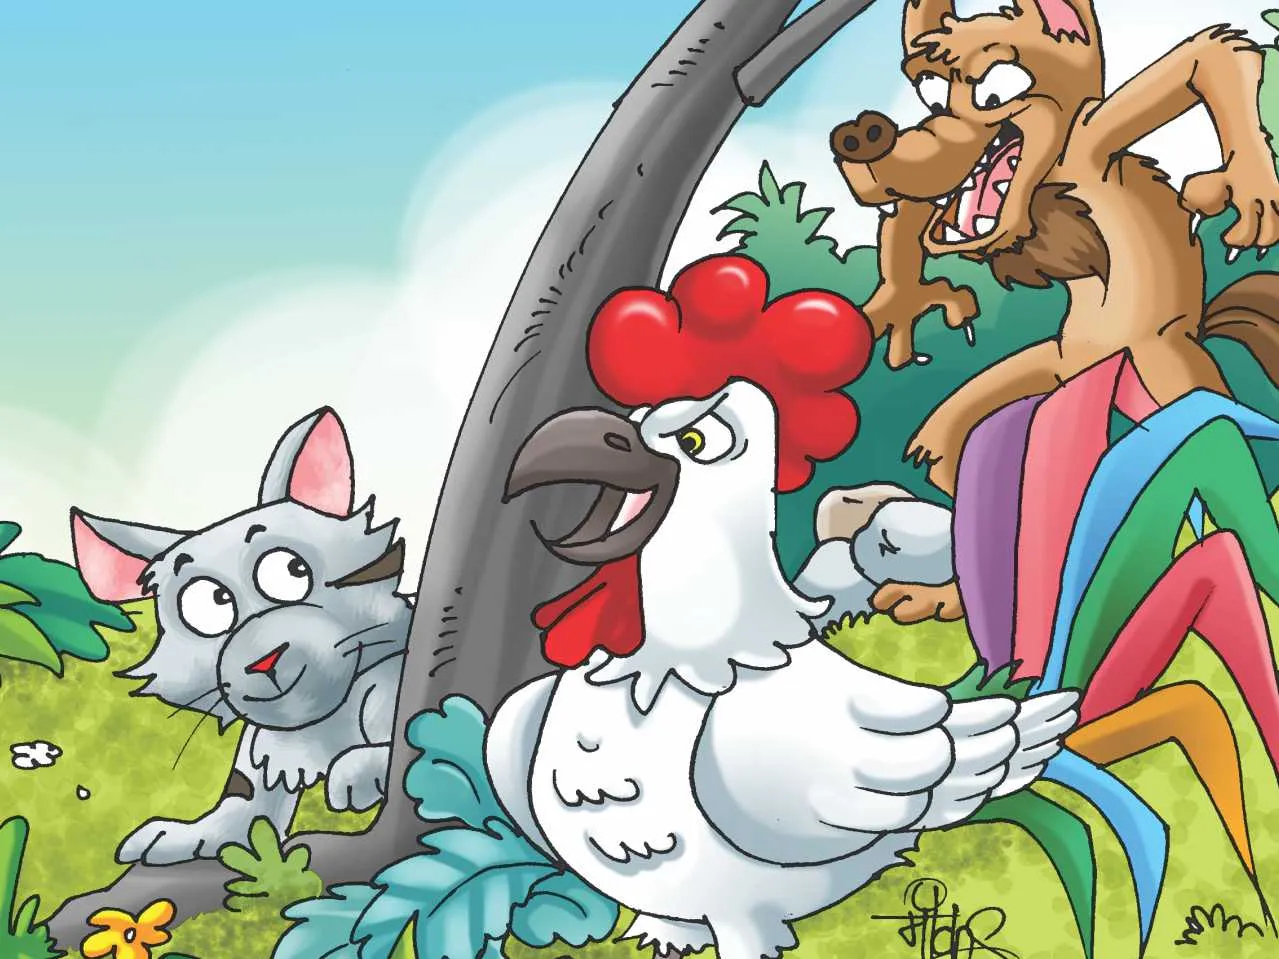 Cat, Rooster and wolf cartoon image